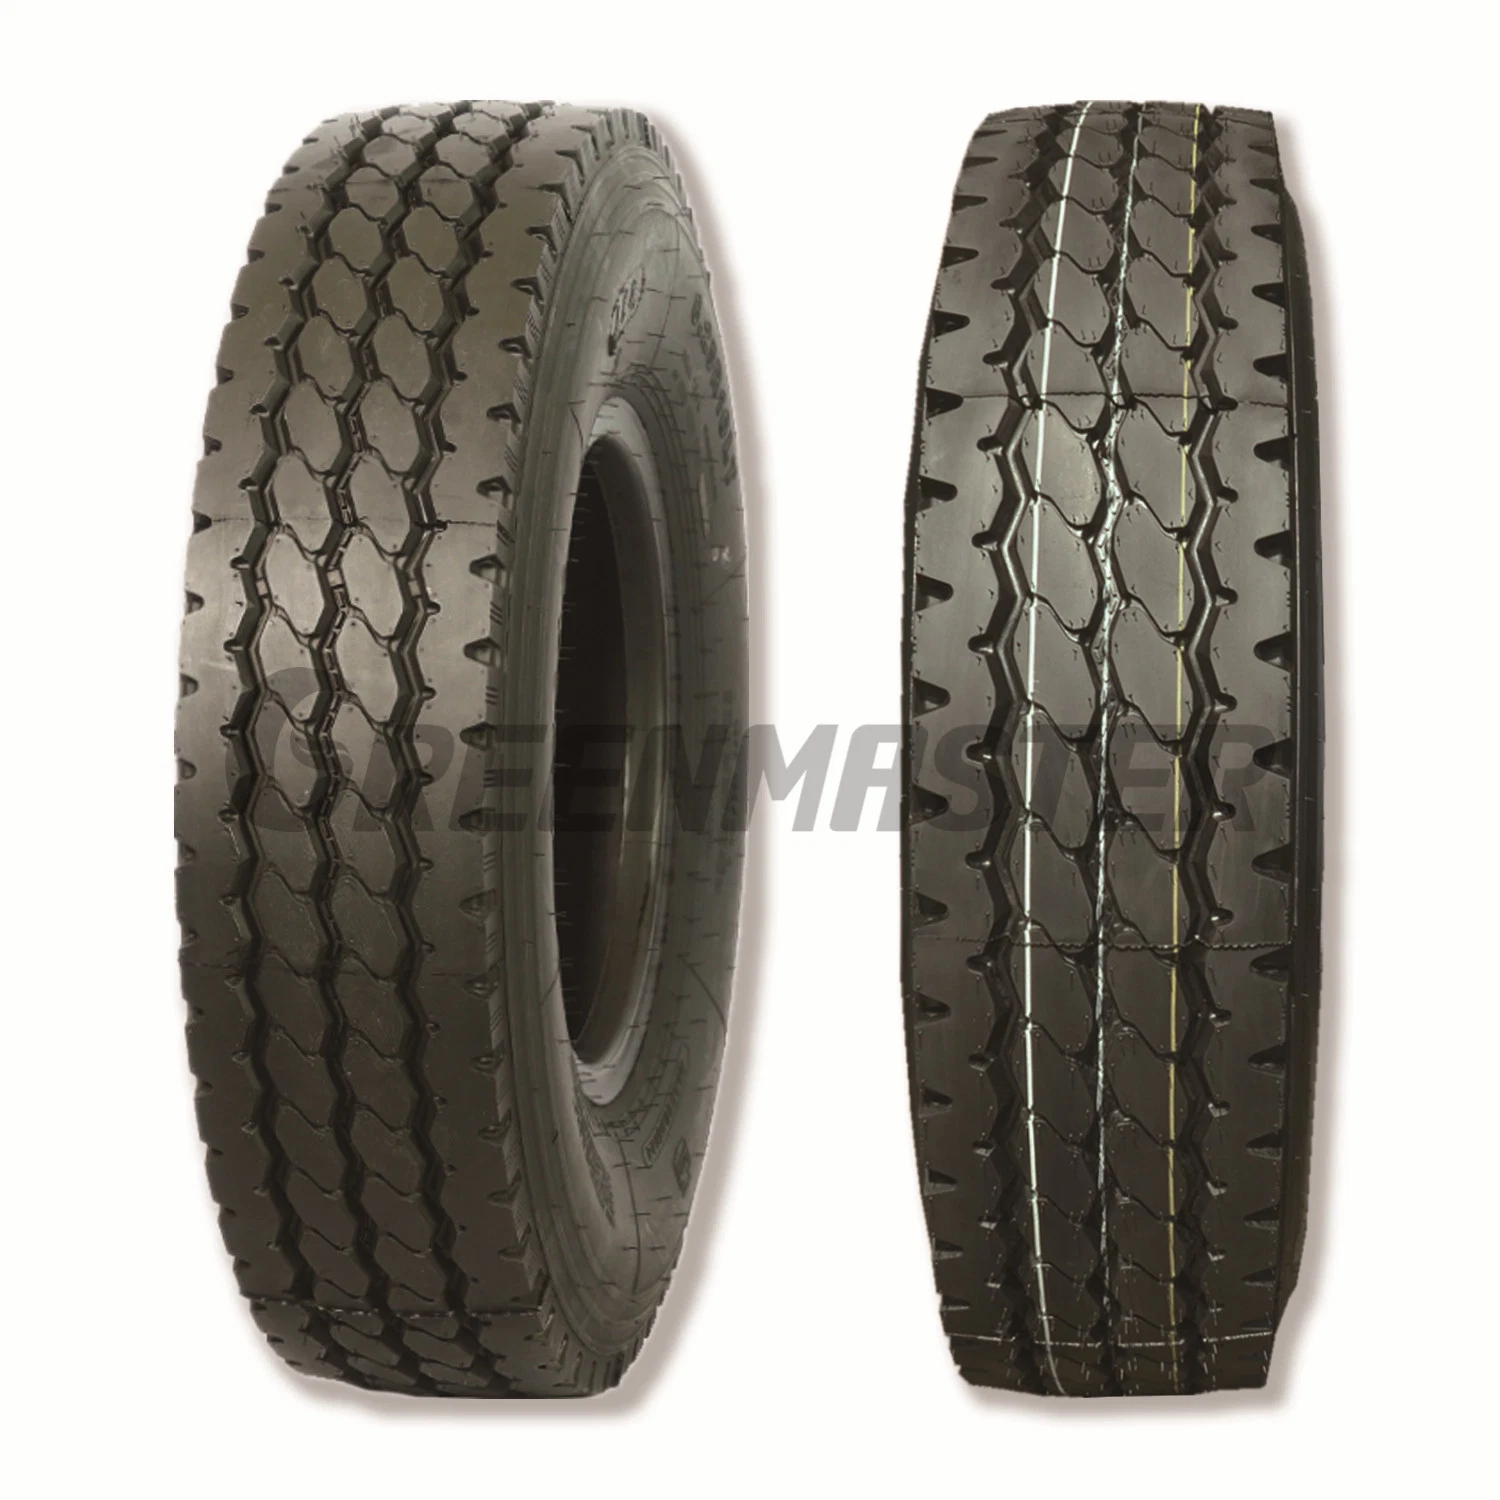 Wholesale Competitive Price All Steel Radial Light Truck Bus Tyre, Trailer Tires TBR Pickup Van Tire 700r16lt 7.00r16 with Long Milage and High Endurance